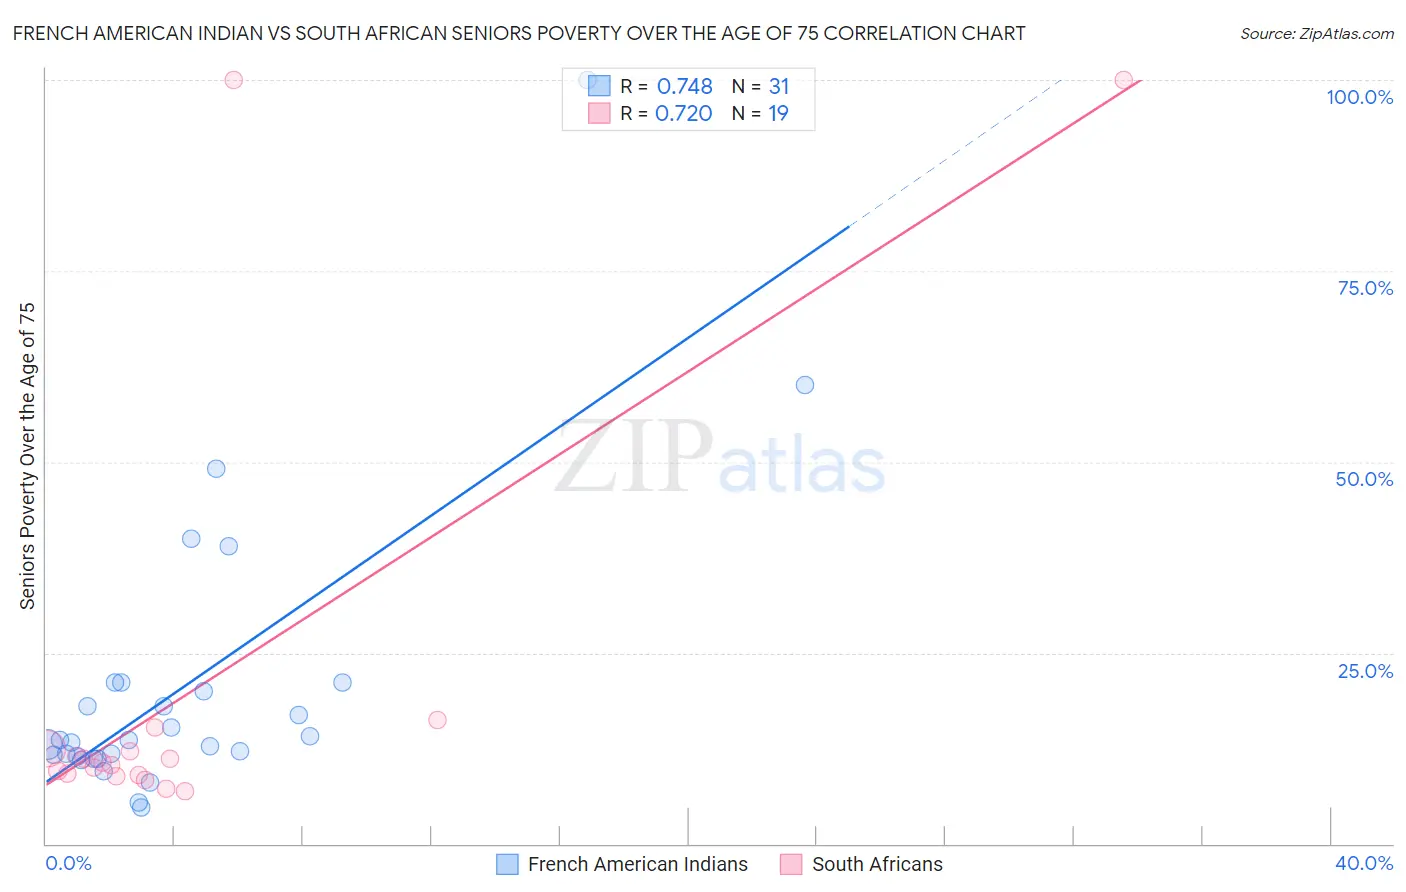 French American Indian vs South African Seniors Poverty Over the Age of 75